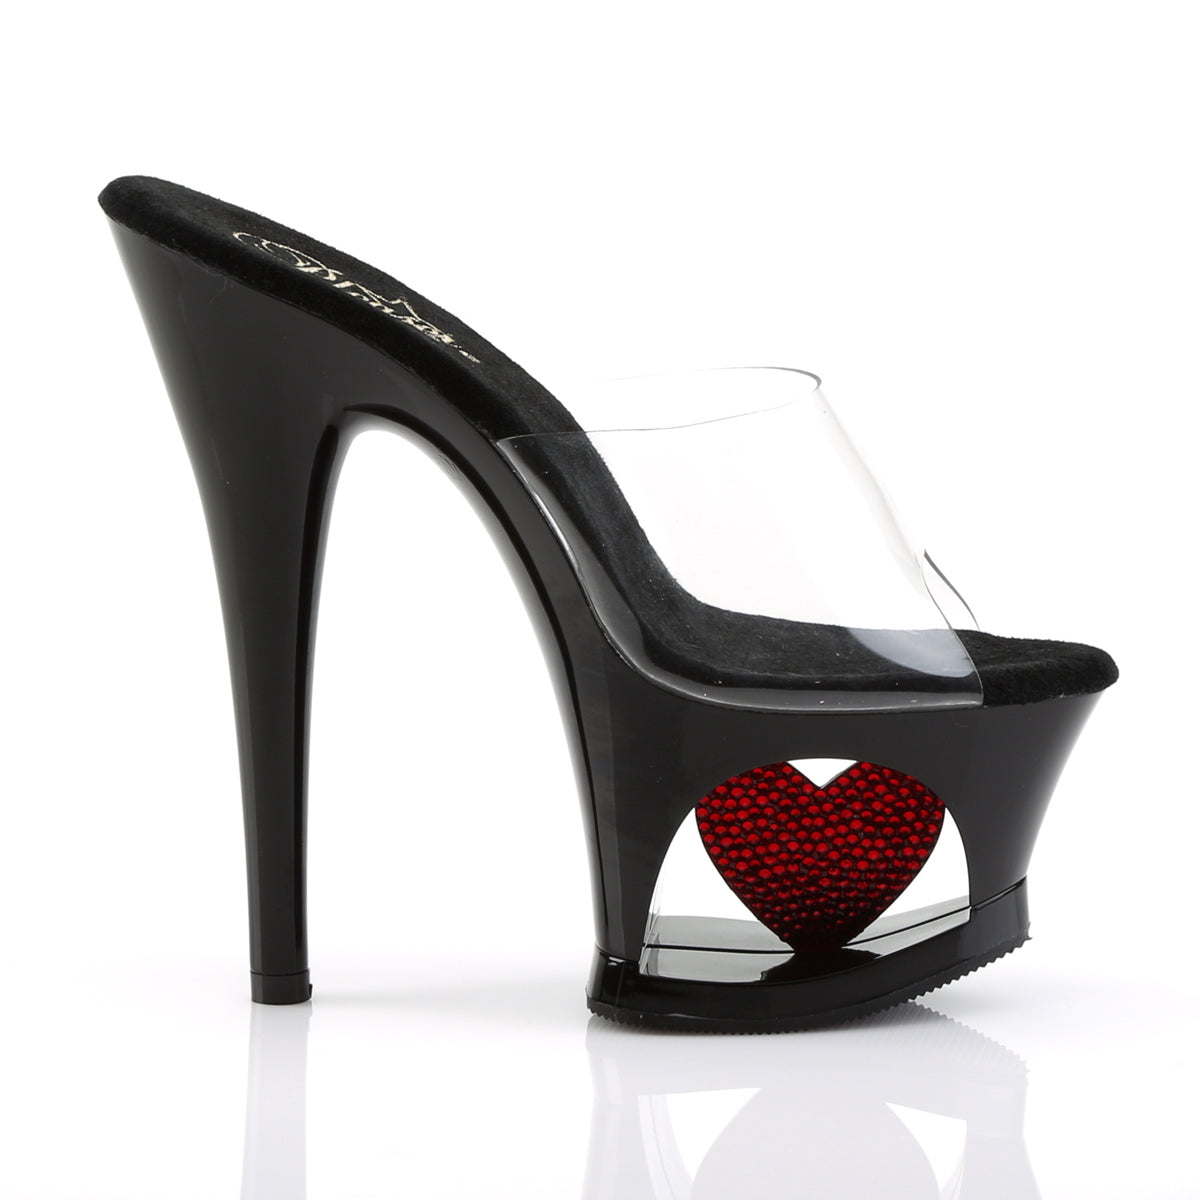 MOON-701HRS 7" Heel ClearBlack with Red Pole Dancing Shoes-Pleaser- Sexy Shoes Fetish Heels